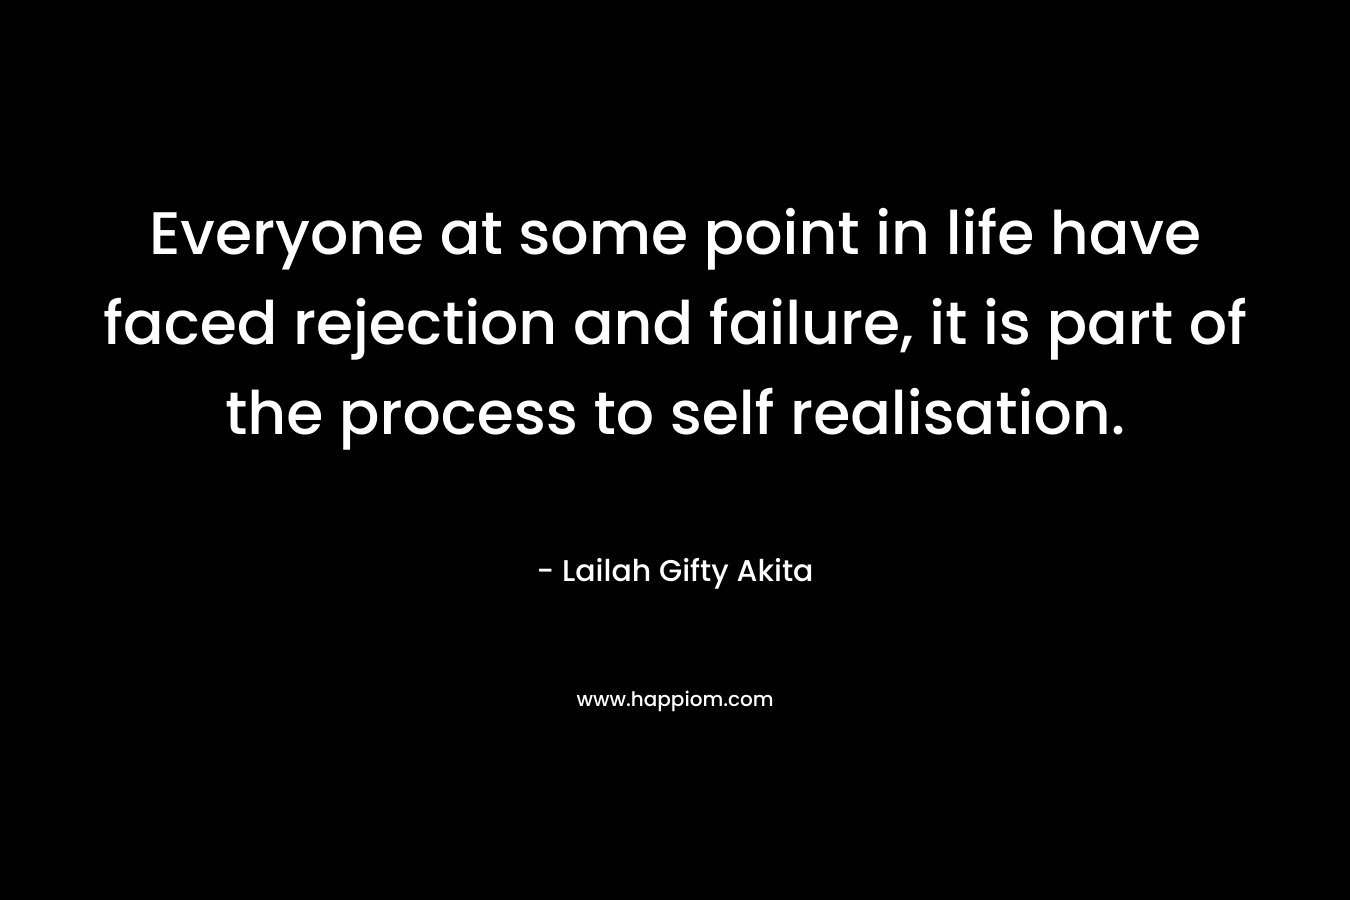 Everyone at some point in life have faced rejection and failure, it is part of the process to self realisation. – Lailah Gifty Akita